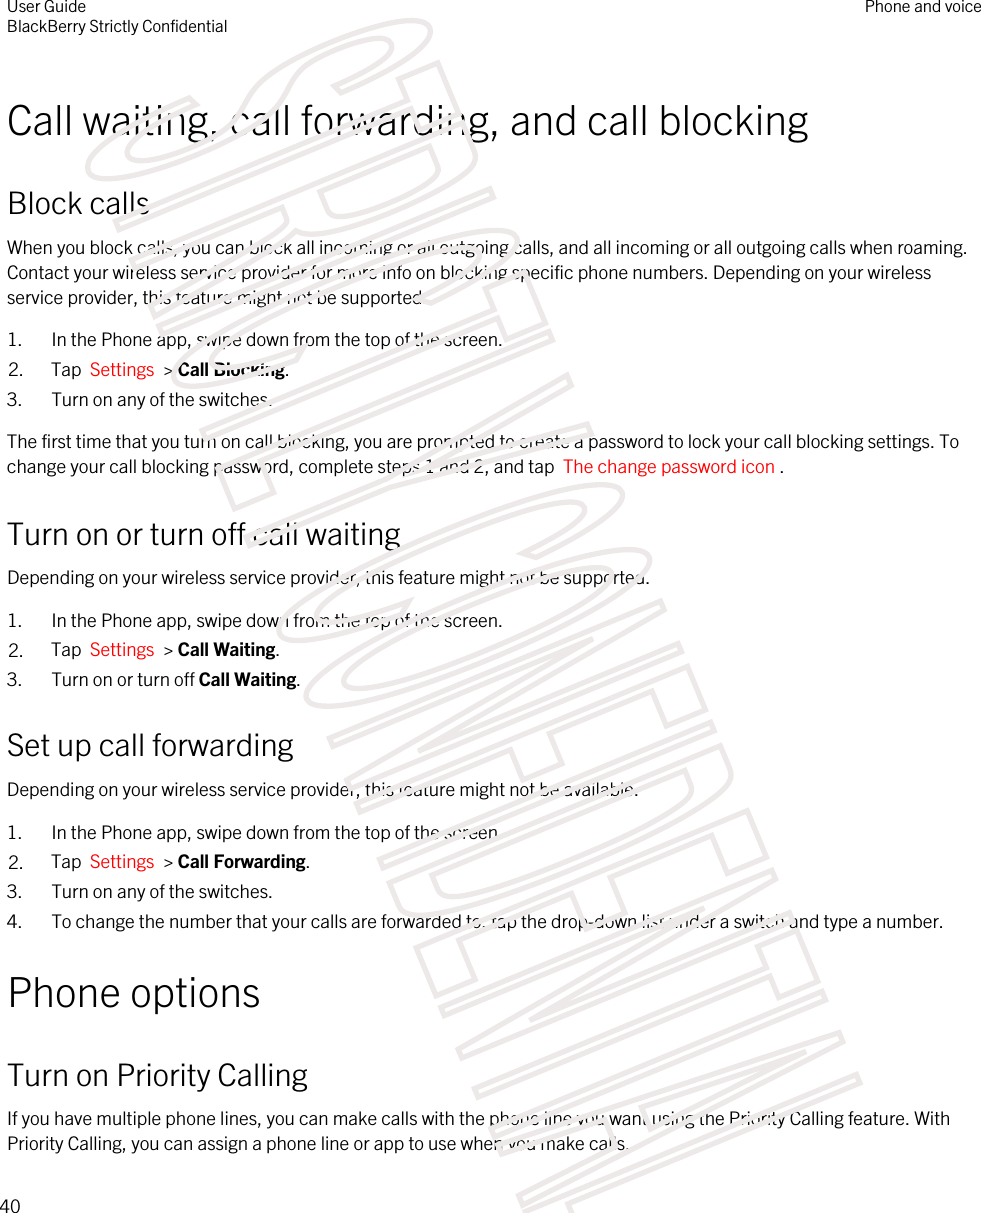 Call waiting, call forwarding, and call blockingBlock callsWhen you block calls, you can block all incoming or all outgoing calls, and all incoming or all outgoing calls when roaming. Contact your wireless service provider for more info on blocking specific phone numbers. Depending on your wireless service provider, this feature might not be supported. 1. In the Phone app, swipe down from the top of the screen.2. Tap  Settings  &gt; Call Blocking.3. Turn on any of the switches.The first time that you turn on call blocking, you are prompted to create a password to lock your call blocking settings. To change your call blocking password, complete steps 1 and 2, and tap  The change password icon .Turn on or turn off call waitingDepending on your wireless service provider, this feature might not be supported. 1. In the Phone app, swipe down from the top of the screen.2. Tap  Settings  &gt; Call Waiting.3. Turn on or turn off Call Waiting.Set up call forwardingDepending on your wireless service provider, this feature might not be available.1. In the Phone app, swipe down from the top of the screen.2. Tap  Settings  &gt; Call Forwarding.3. Turn on any of the switches.4. To change the number that your calls are forwarded to, tap the drop-down list under a switch and type a number.Phone optionsTurn on Priority CallingIf you have multiple phone lines, you can make calls with the phone line you want using the Priority Calling feature. With Priority Calling, you can assign a phone line or app to use when you make calls.User GuideBlackBerry Strictly Confidential Phone and voice40STRICTLY CONFIDENTIAL